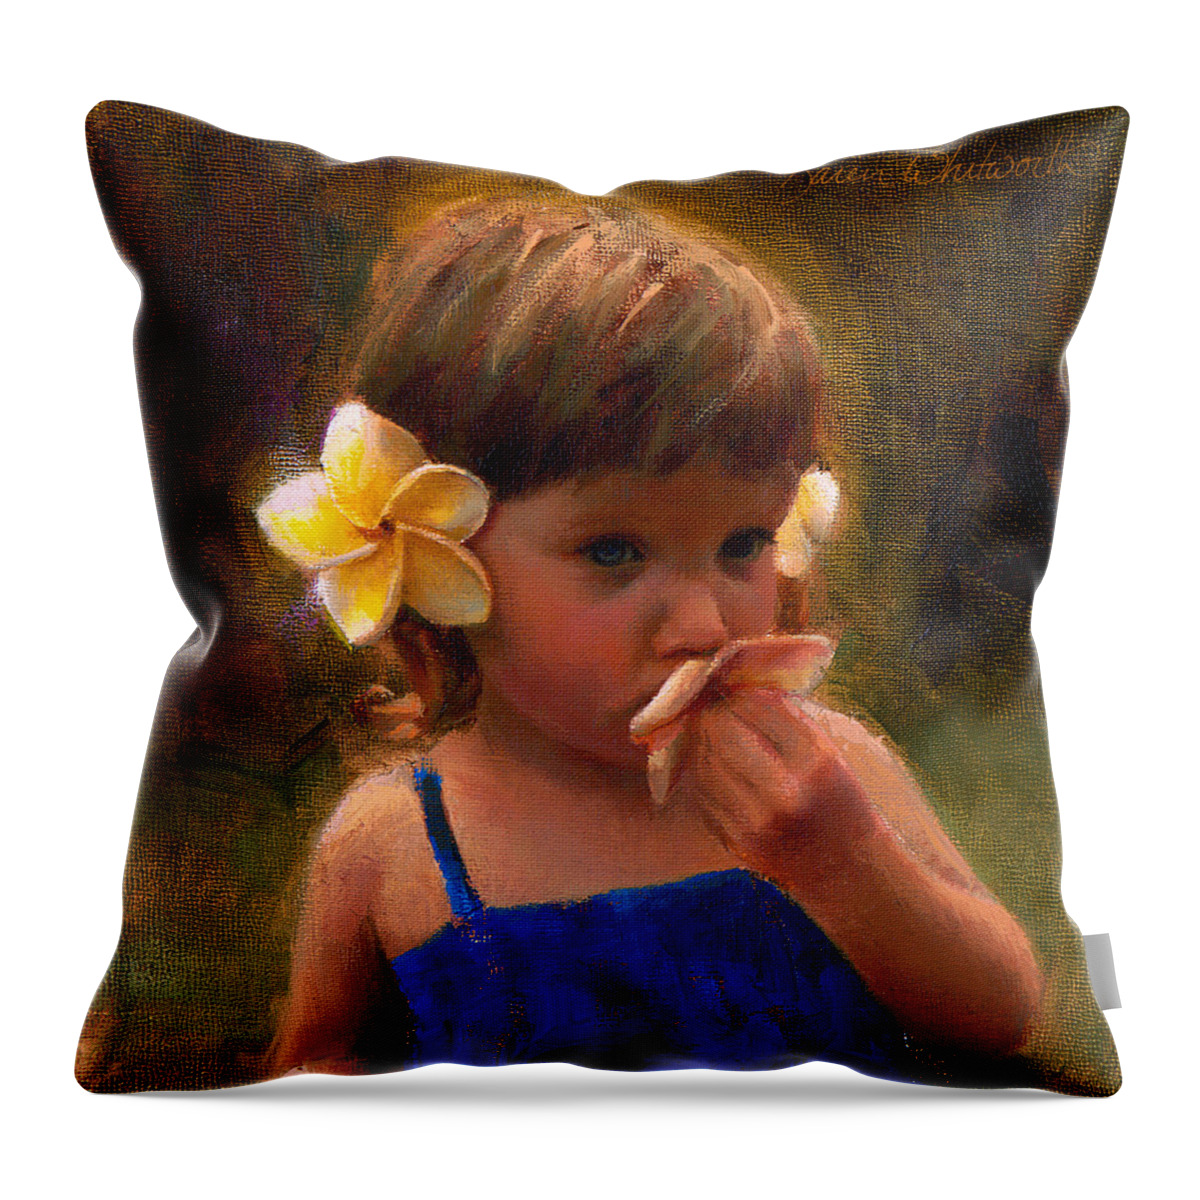 Plumeria Throw Pillow featuring the painting Flower Girl - Tropical Portrait with Plumeria Flowers by K Whitworth